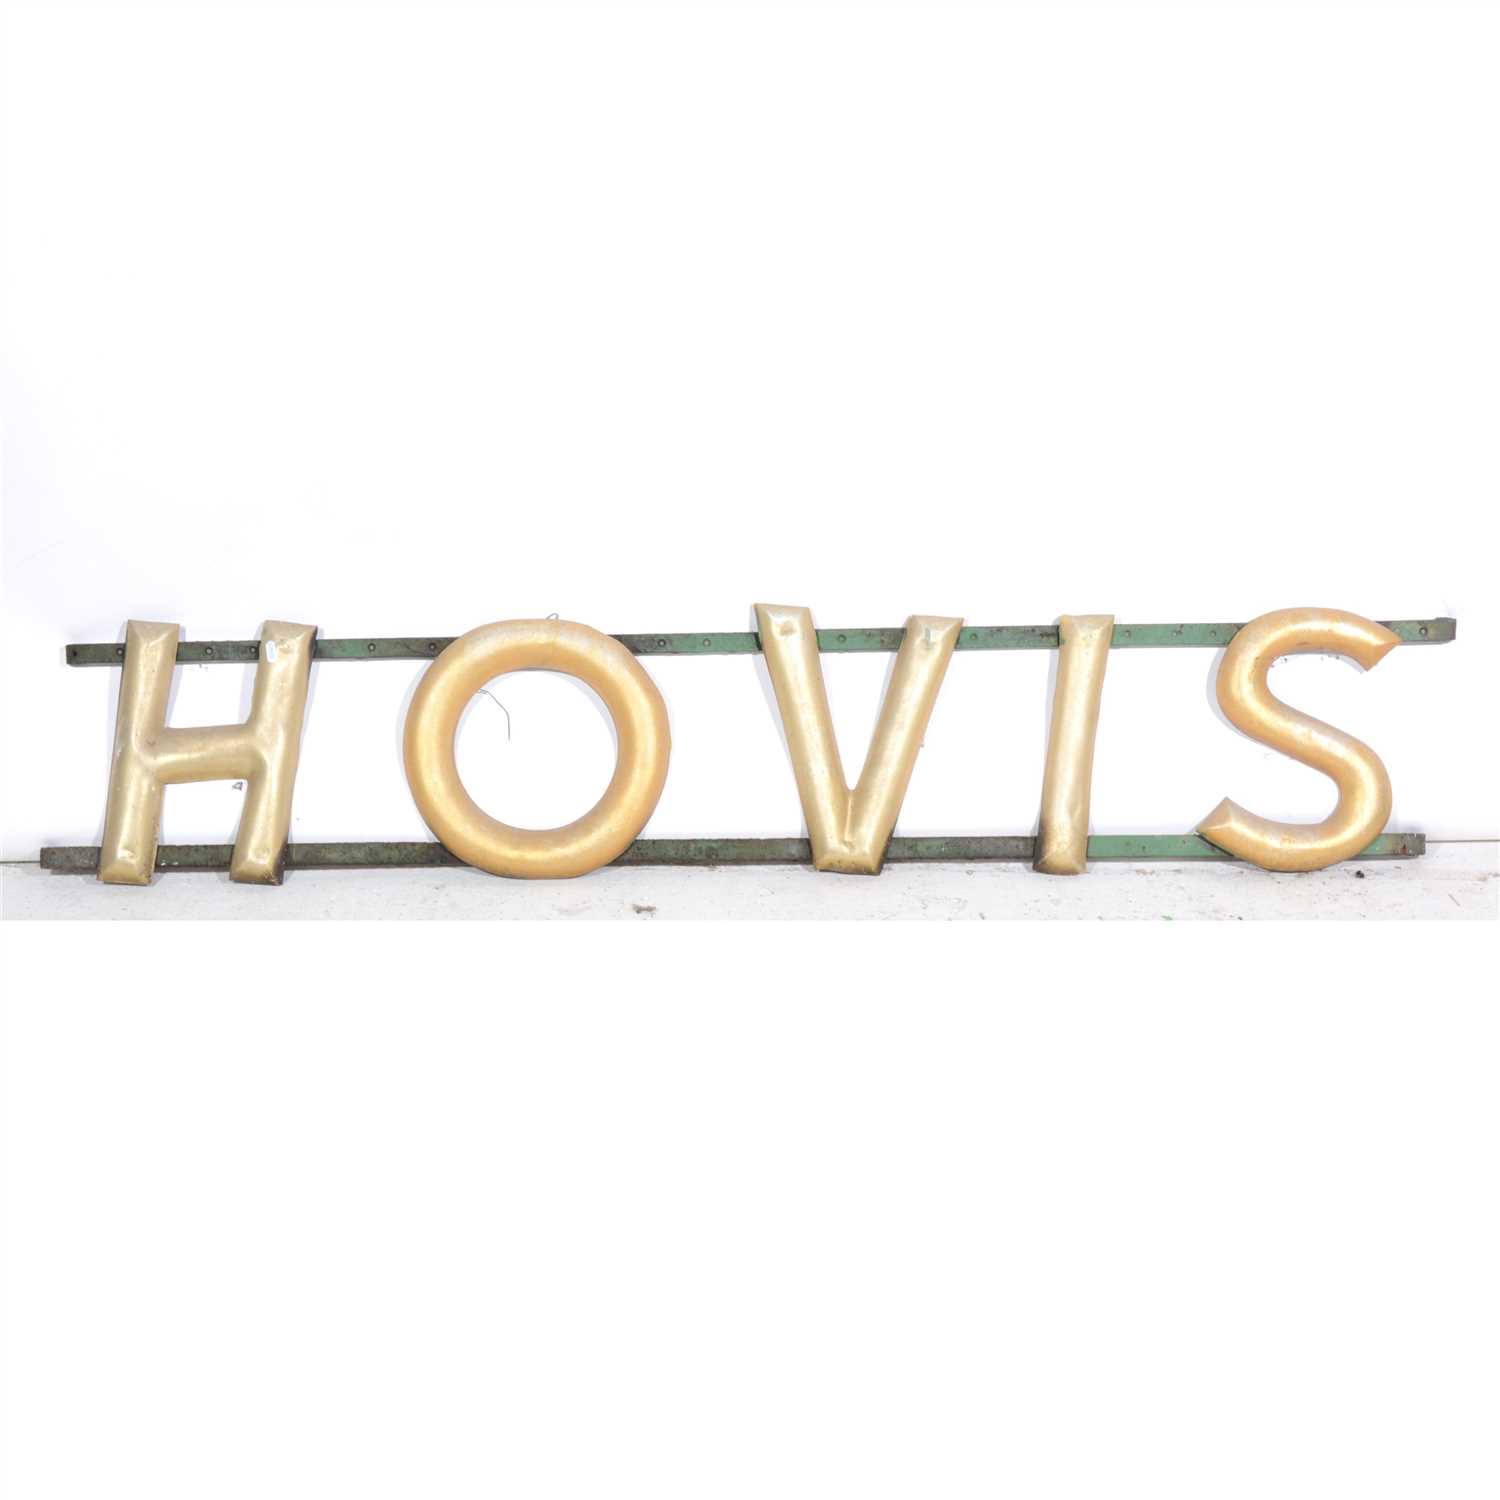 Lot 163 - Advertising: HOVIS sign, circa 1940's